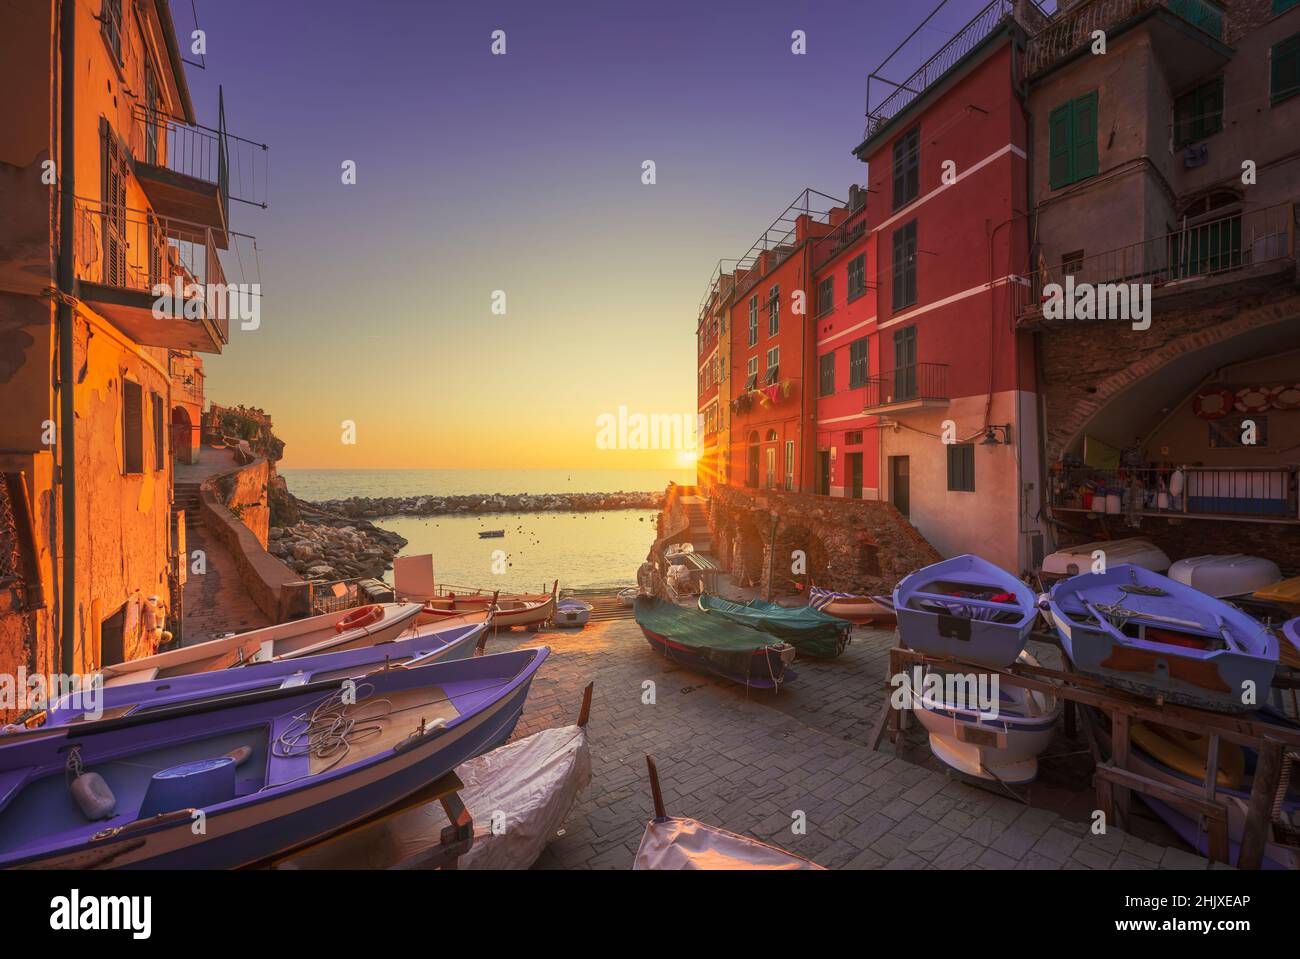 Riomaggiore village street, boats and sea in at sunset, Cinque Terre National Park, Liguria region, Italy, Europe. Stock Photo